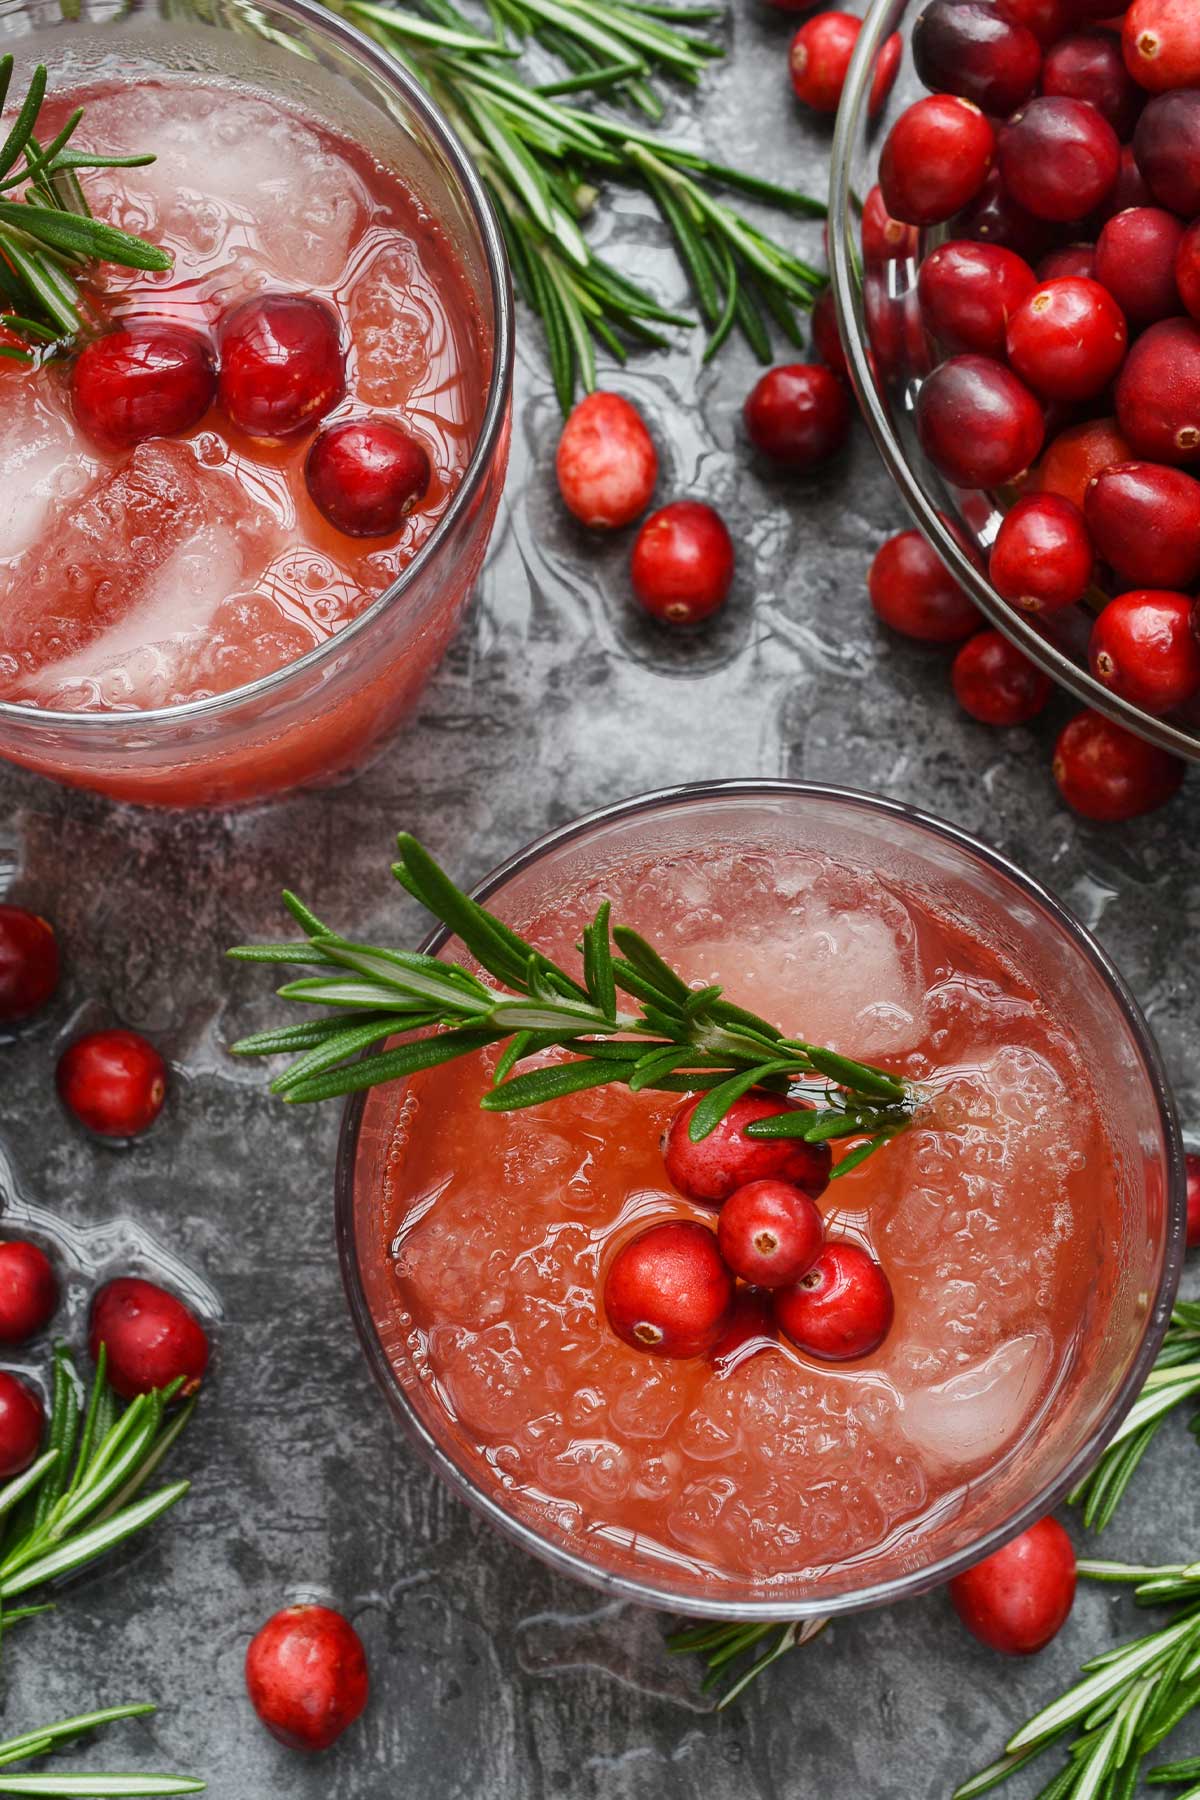 Overhead view of cranberry margaritas with ice, fresh cranberries, and rosemary sprigs, bowl of fresh cranberries.